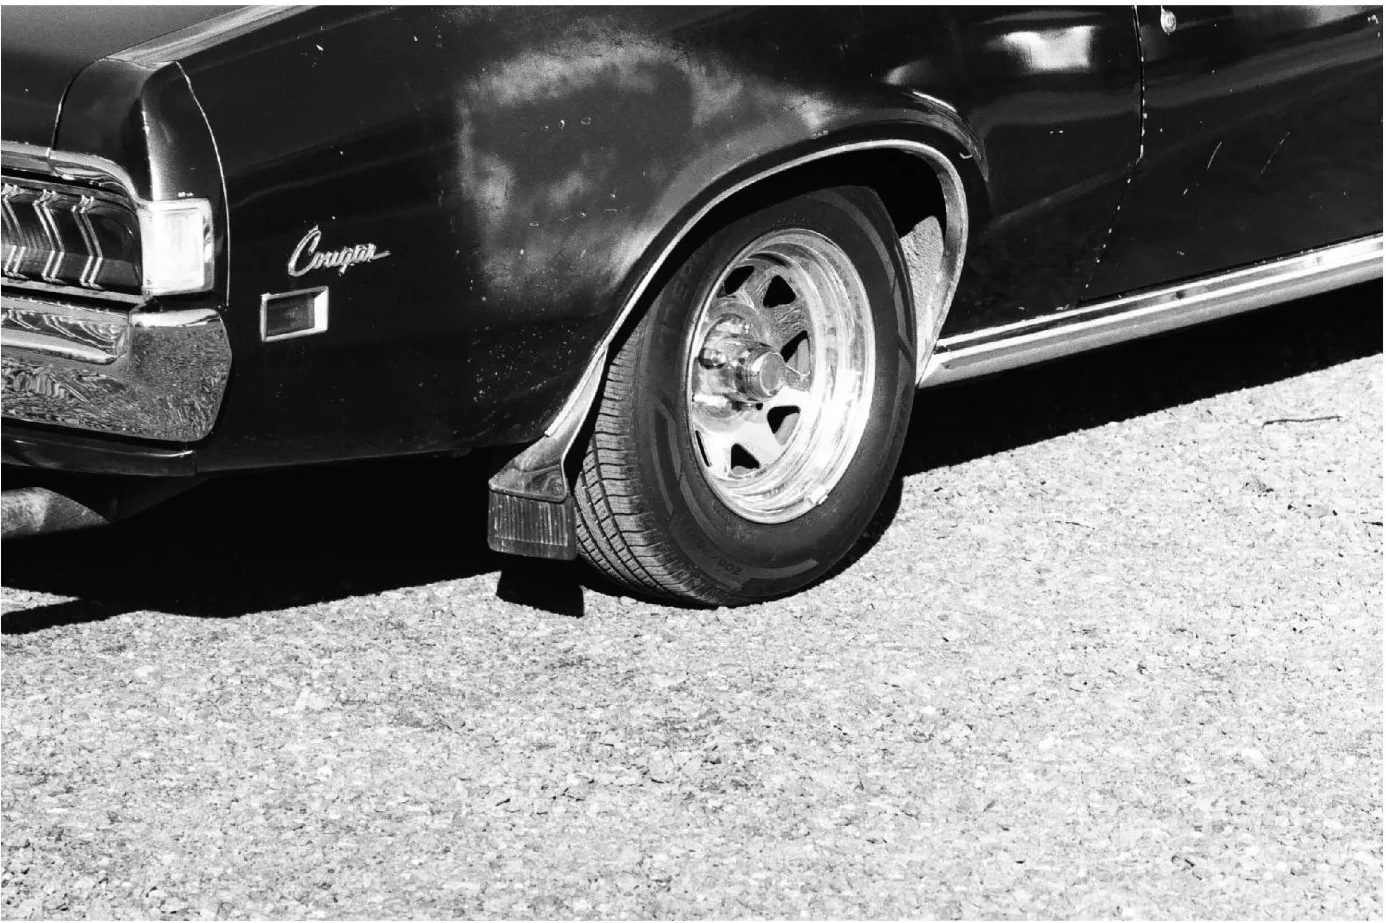 Black and white analogue photograph of a car